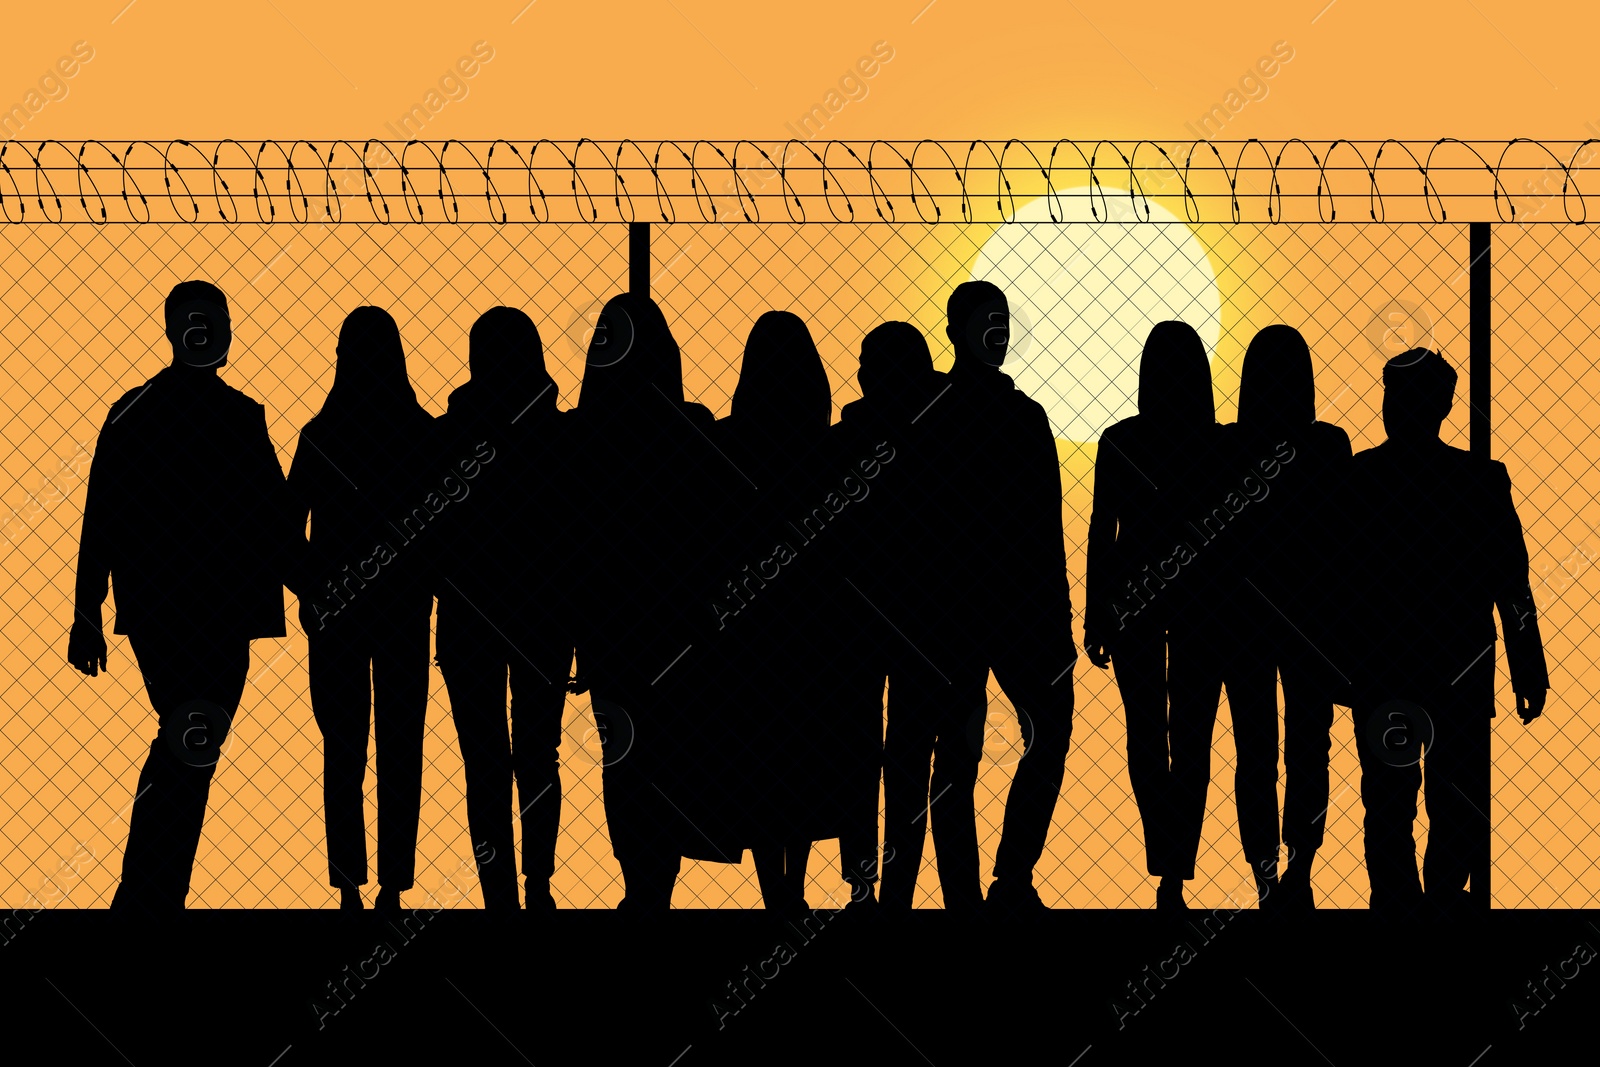 Image of Immigration. Silhouettes of people near perimeter fence with barbed wire on top at sunset, illustration